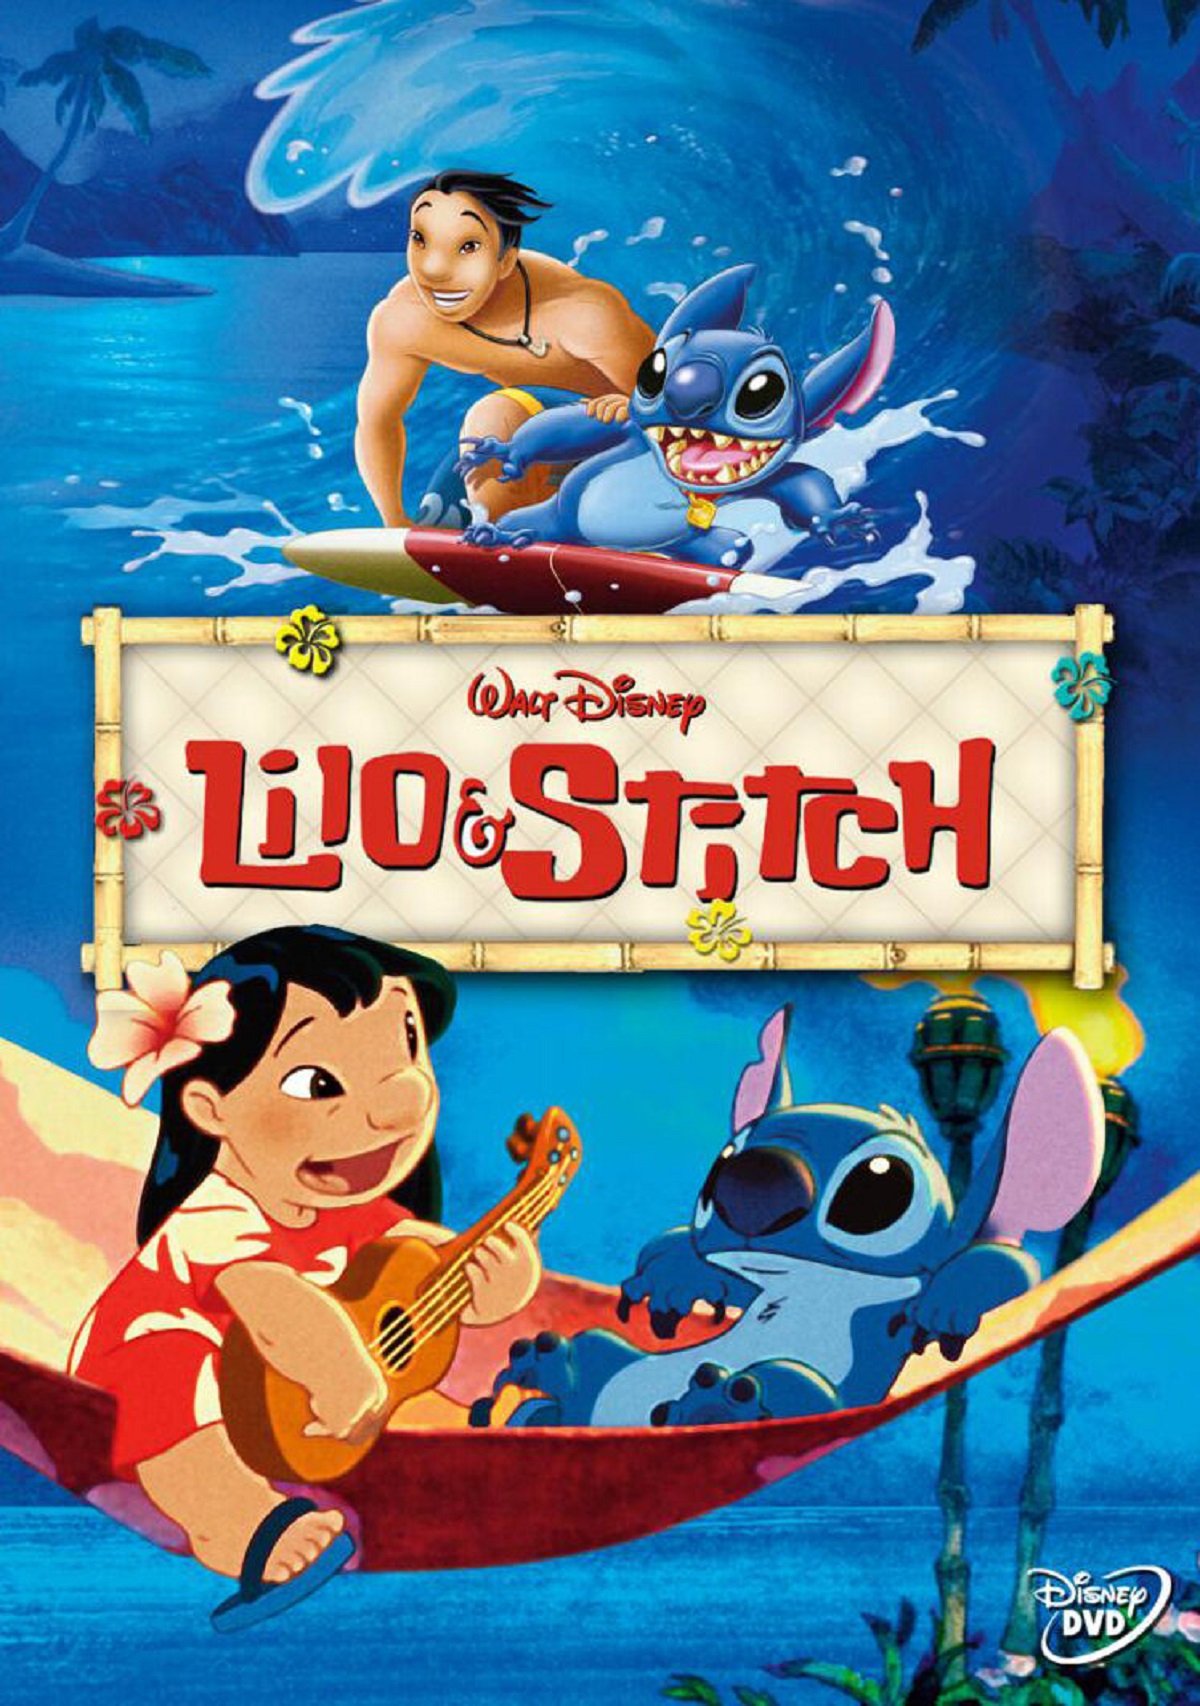 Lilo & Stitch: How Disney's animated classic was made cheap and in